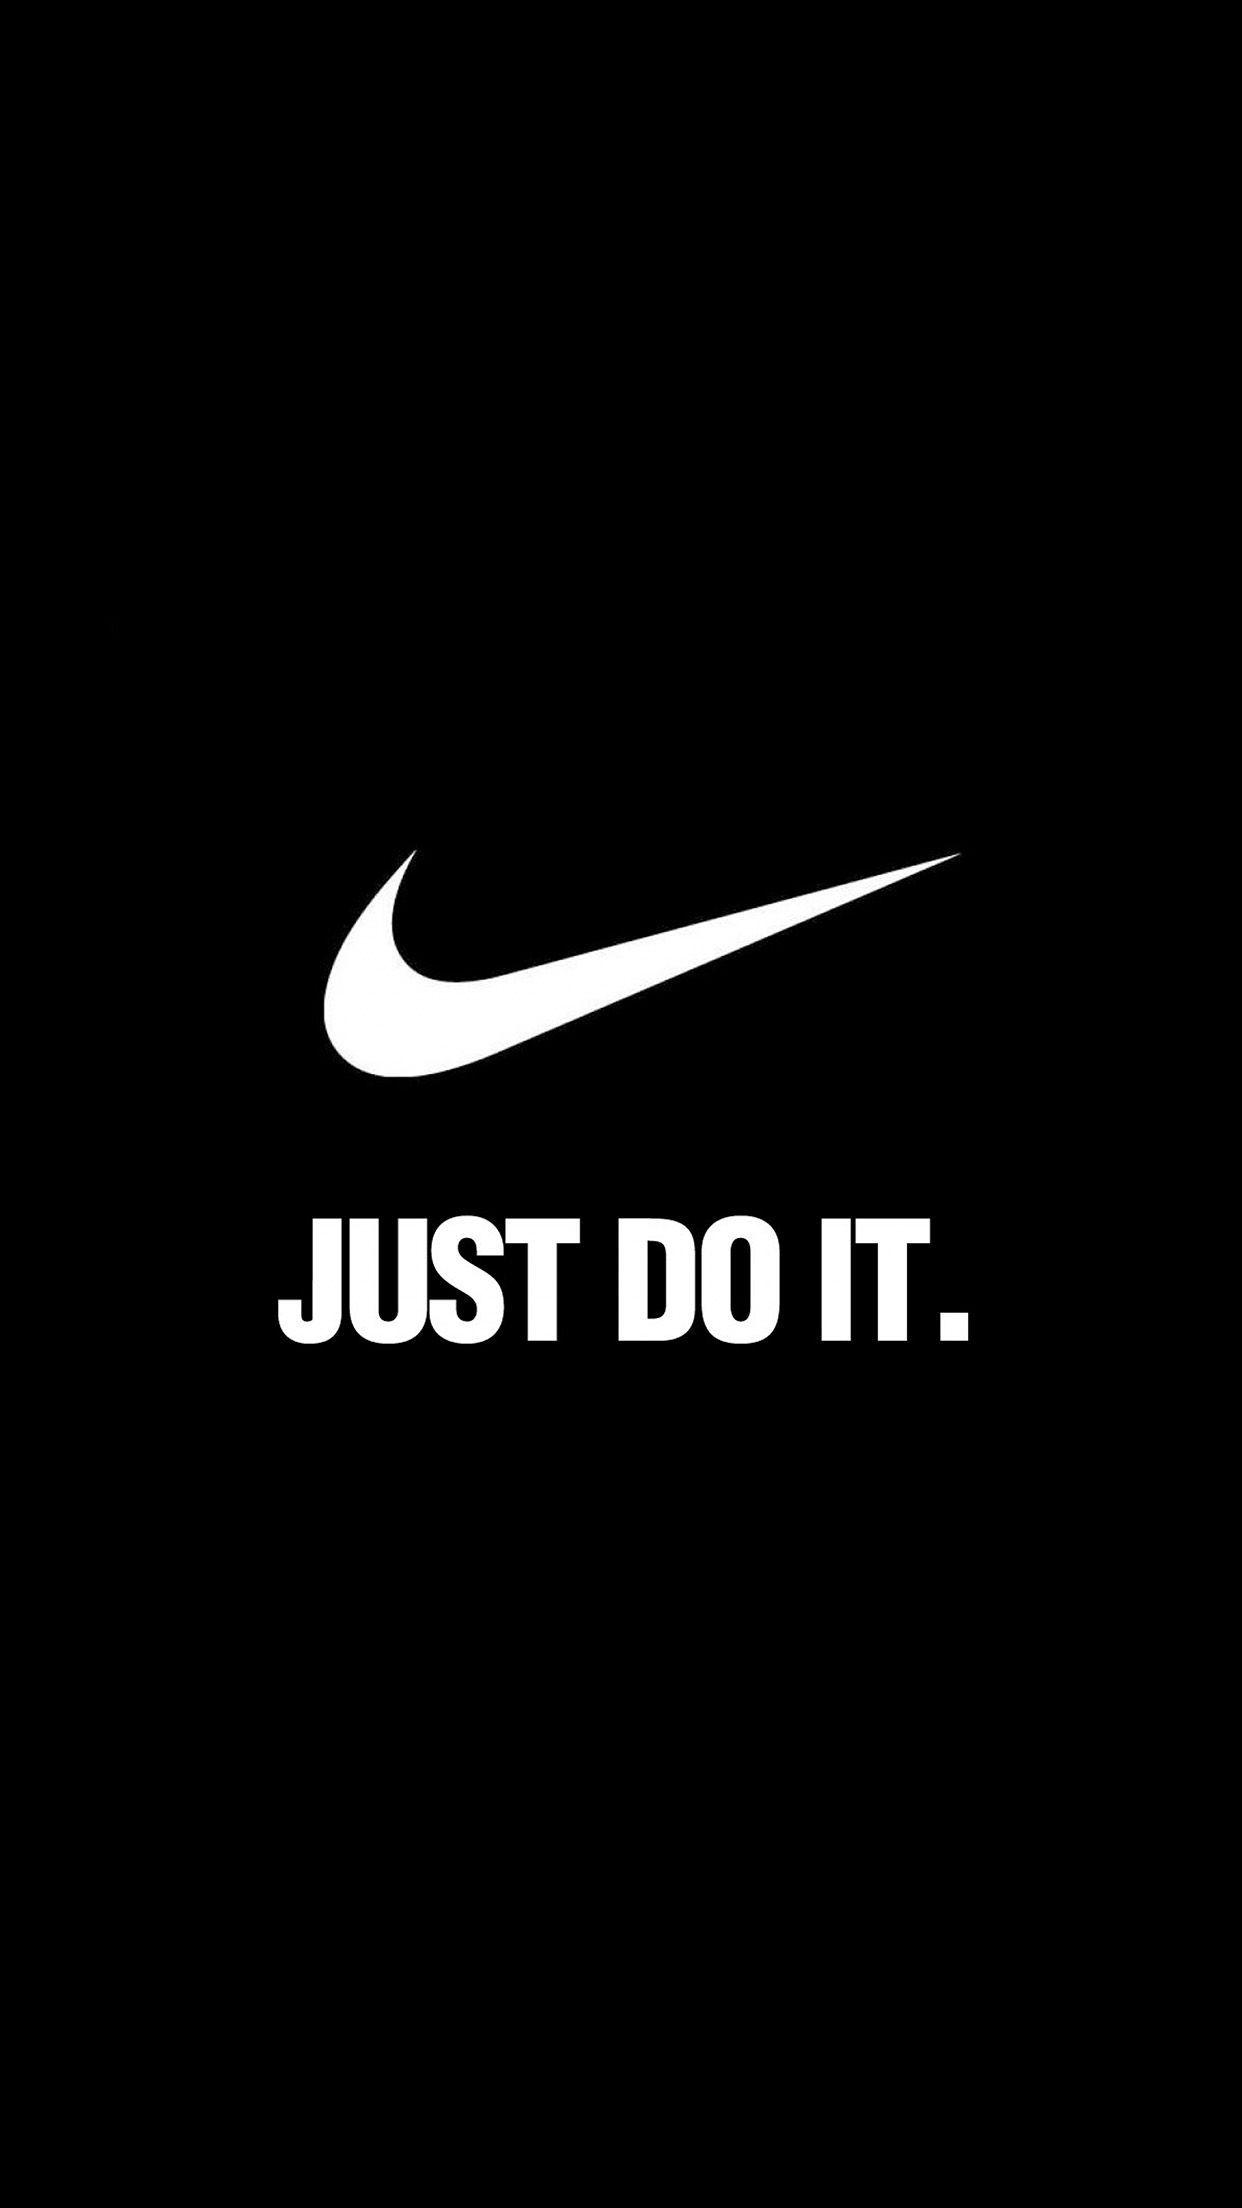 Nike Black and White Logo - ↑↑TAP AND GET THE FREE APP! Logo Nike Brand Just Do It Motivation